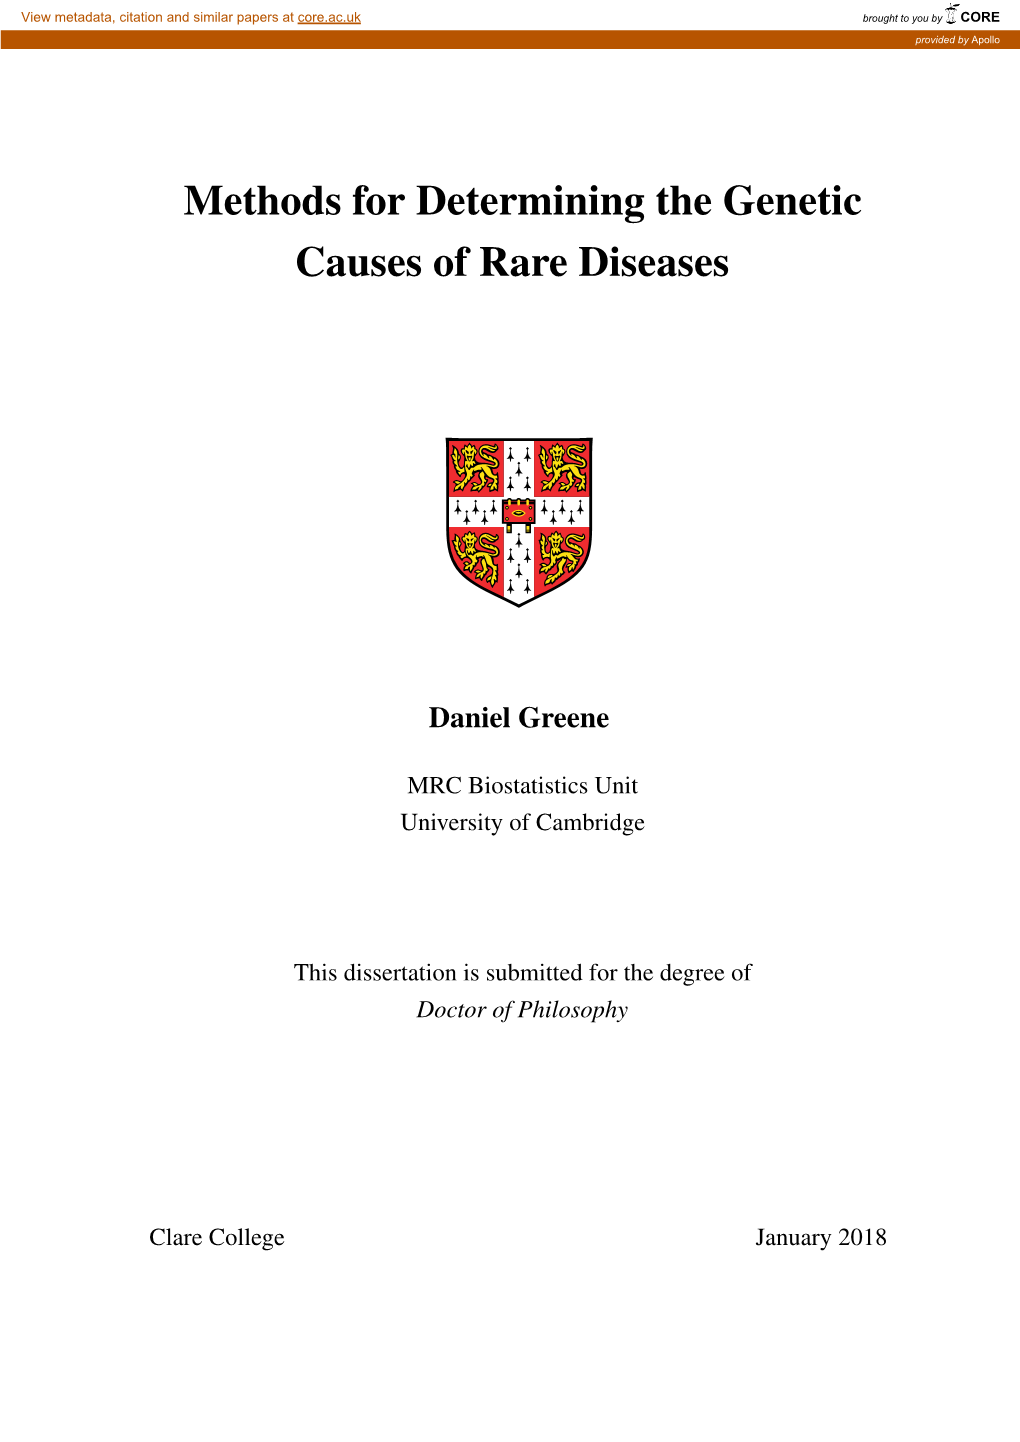 Methods for Determining the Genetic Causes of Rare Diseases